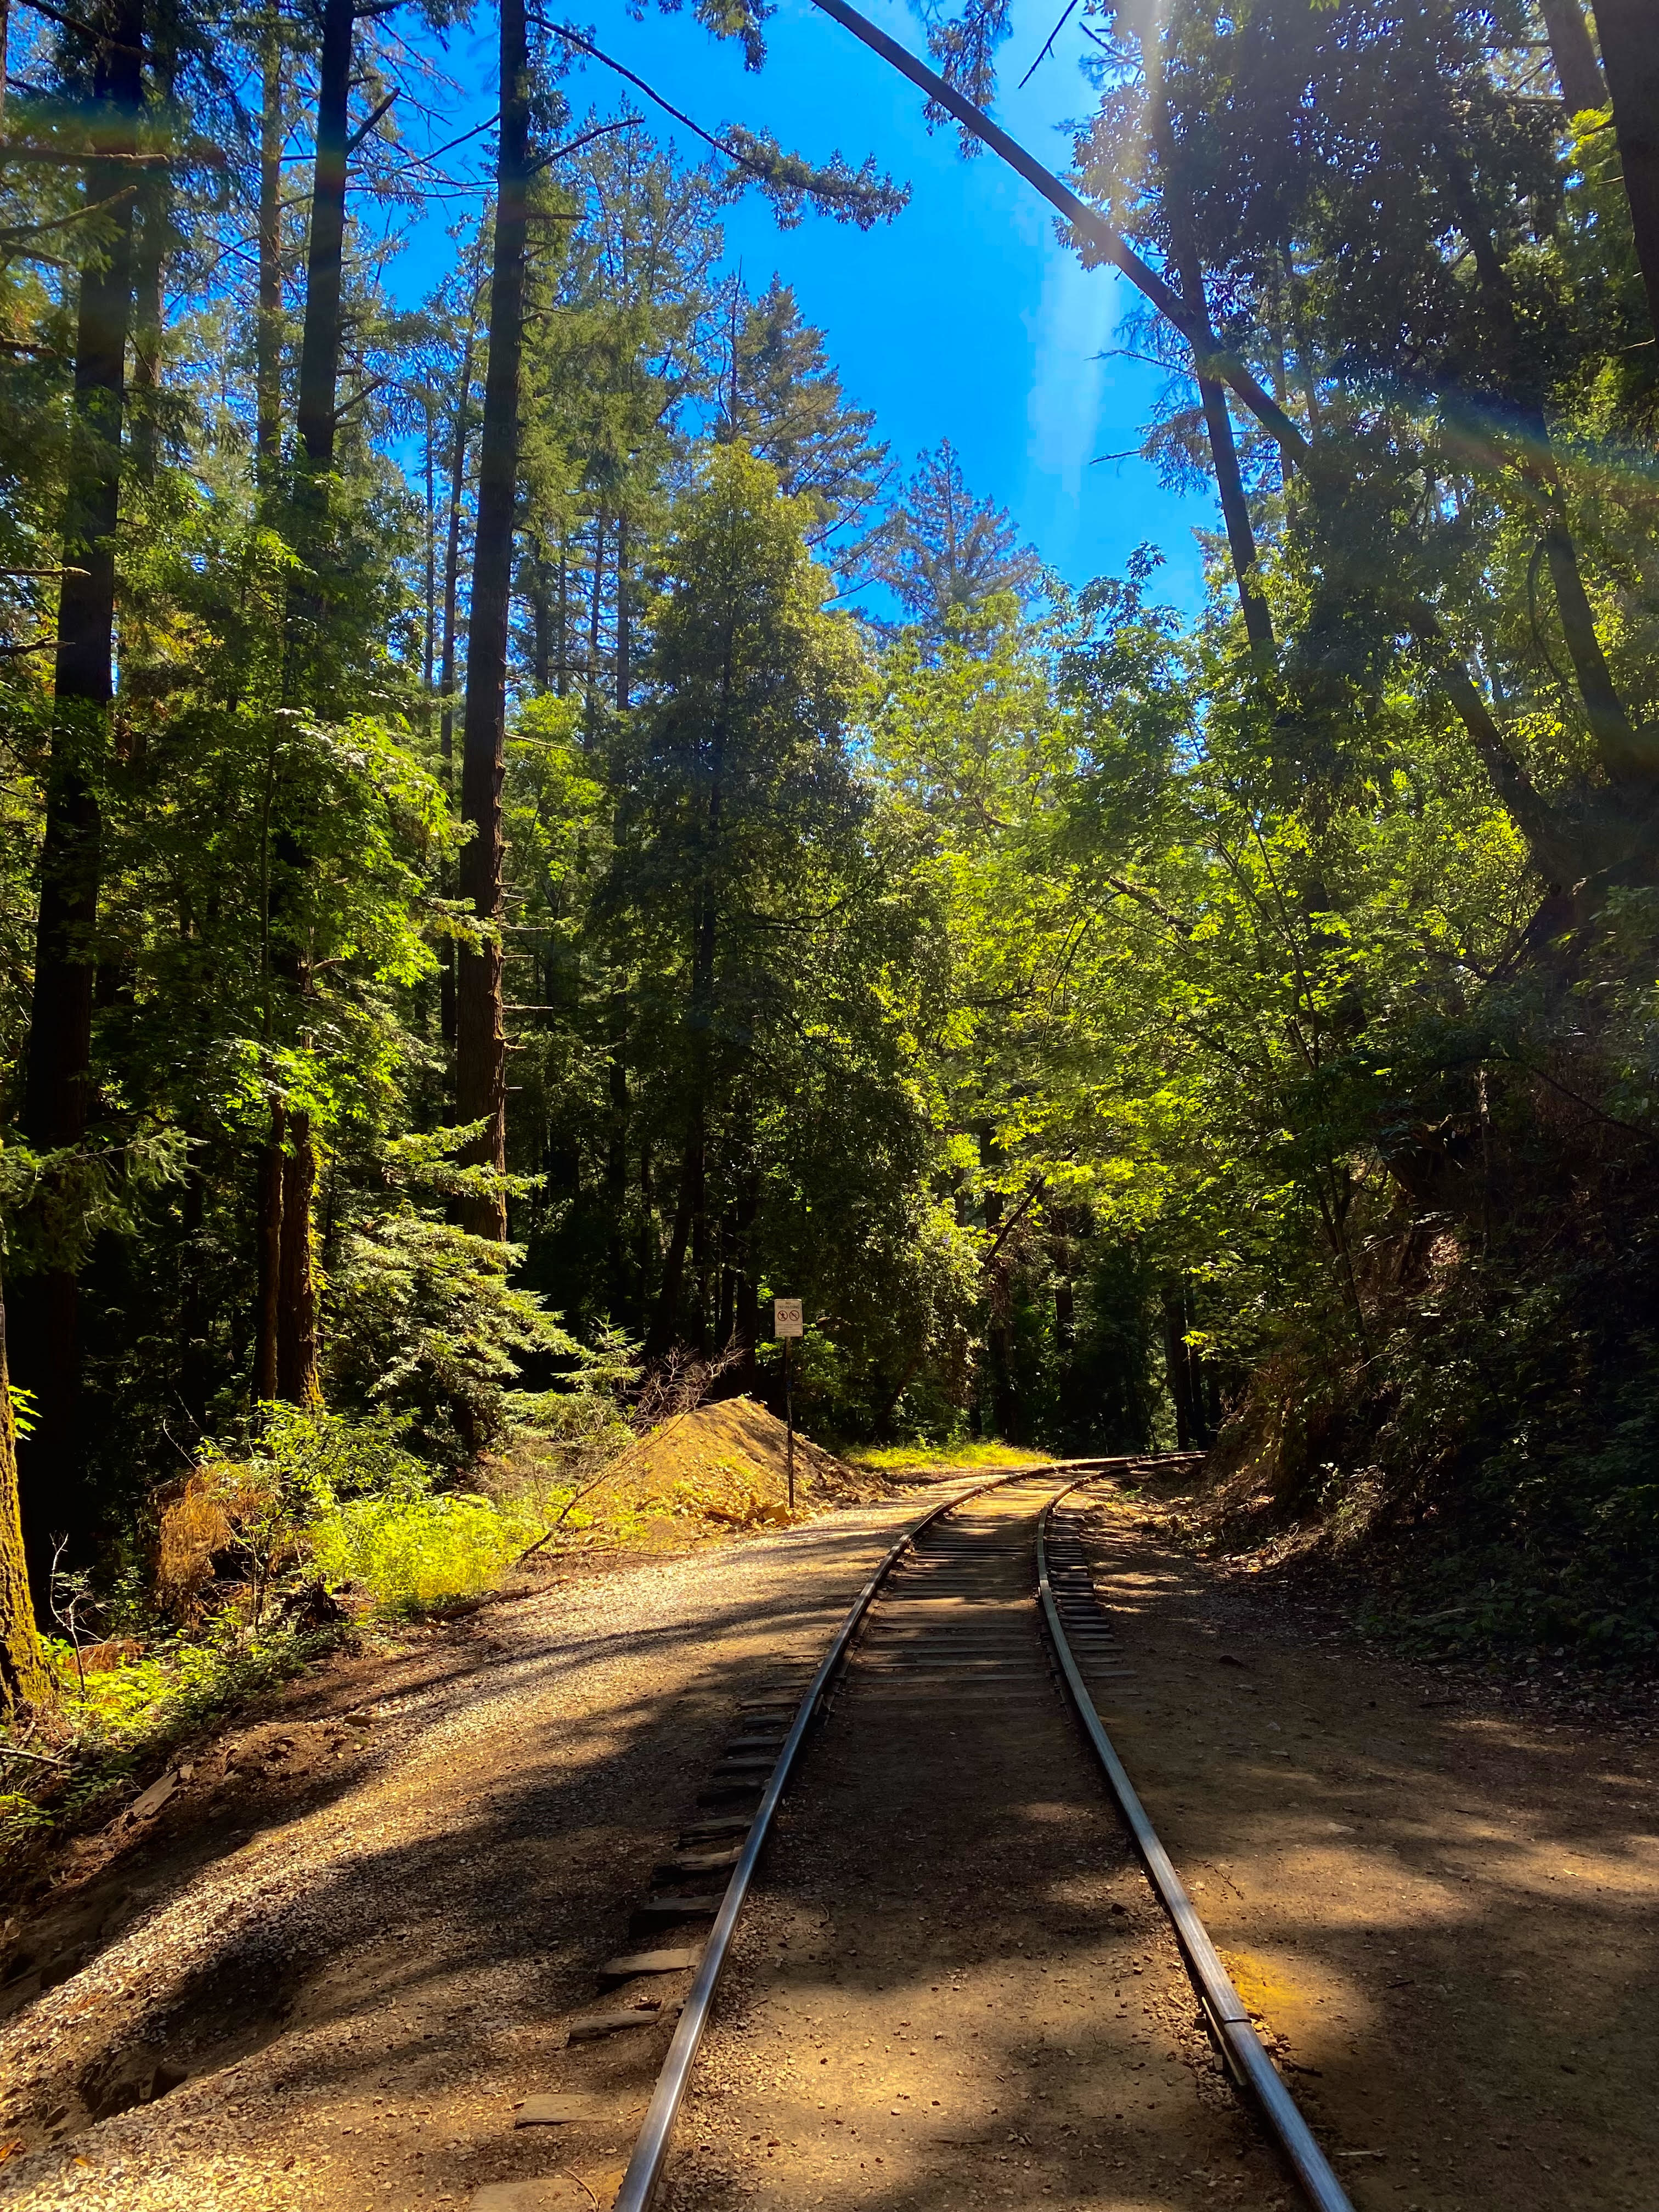 a railroad track in the middle of a lush forest on a sunny day